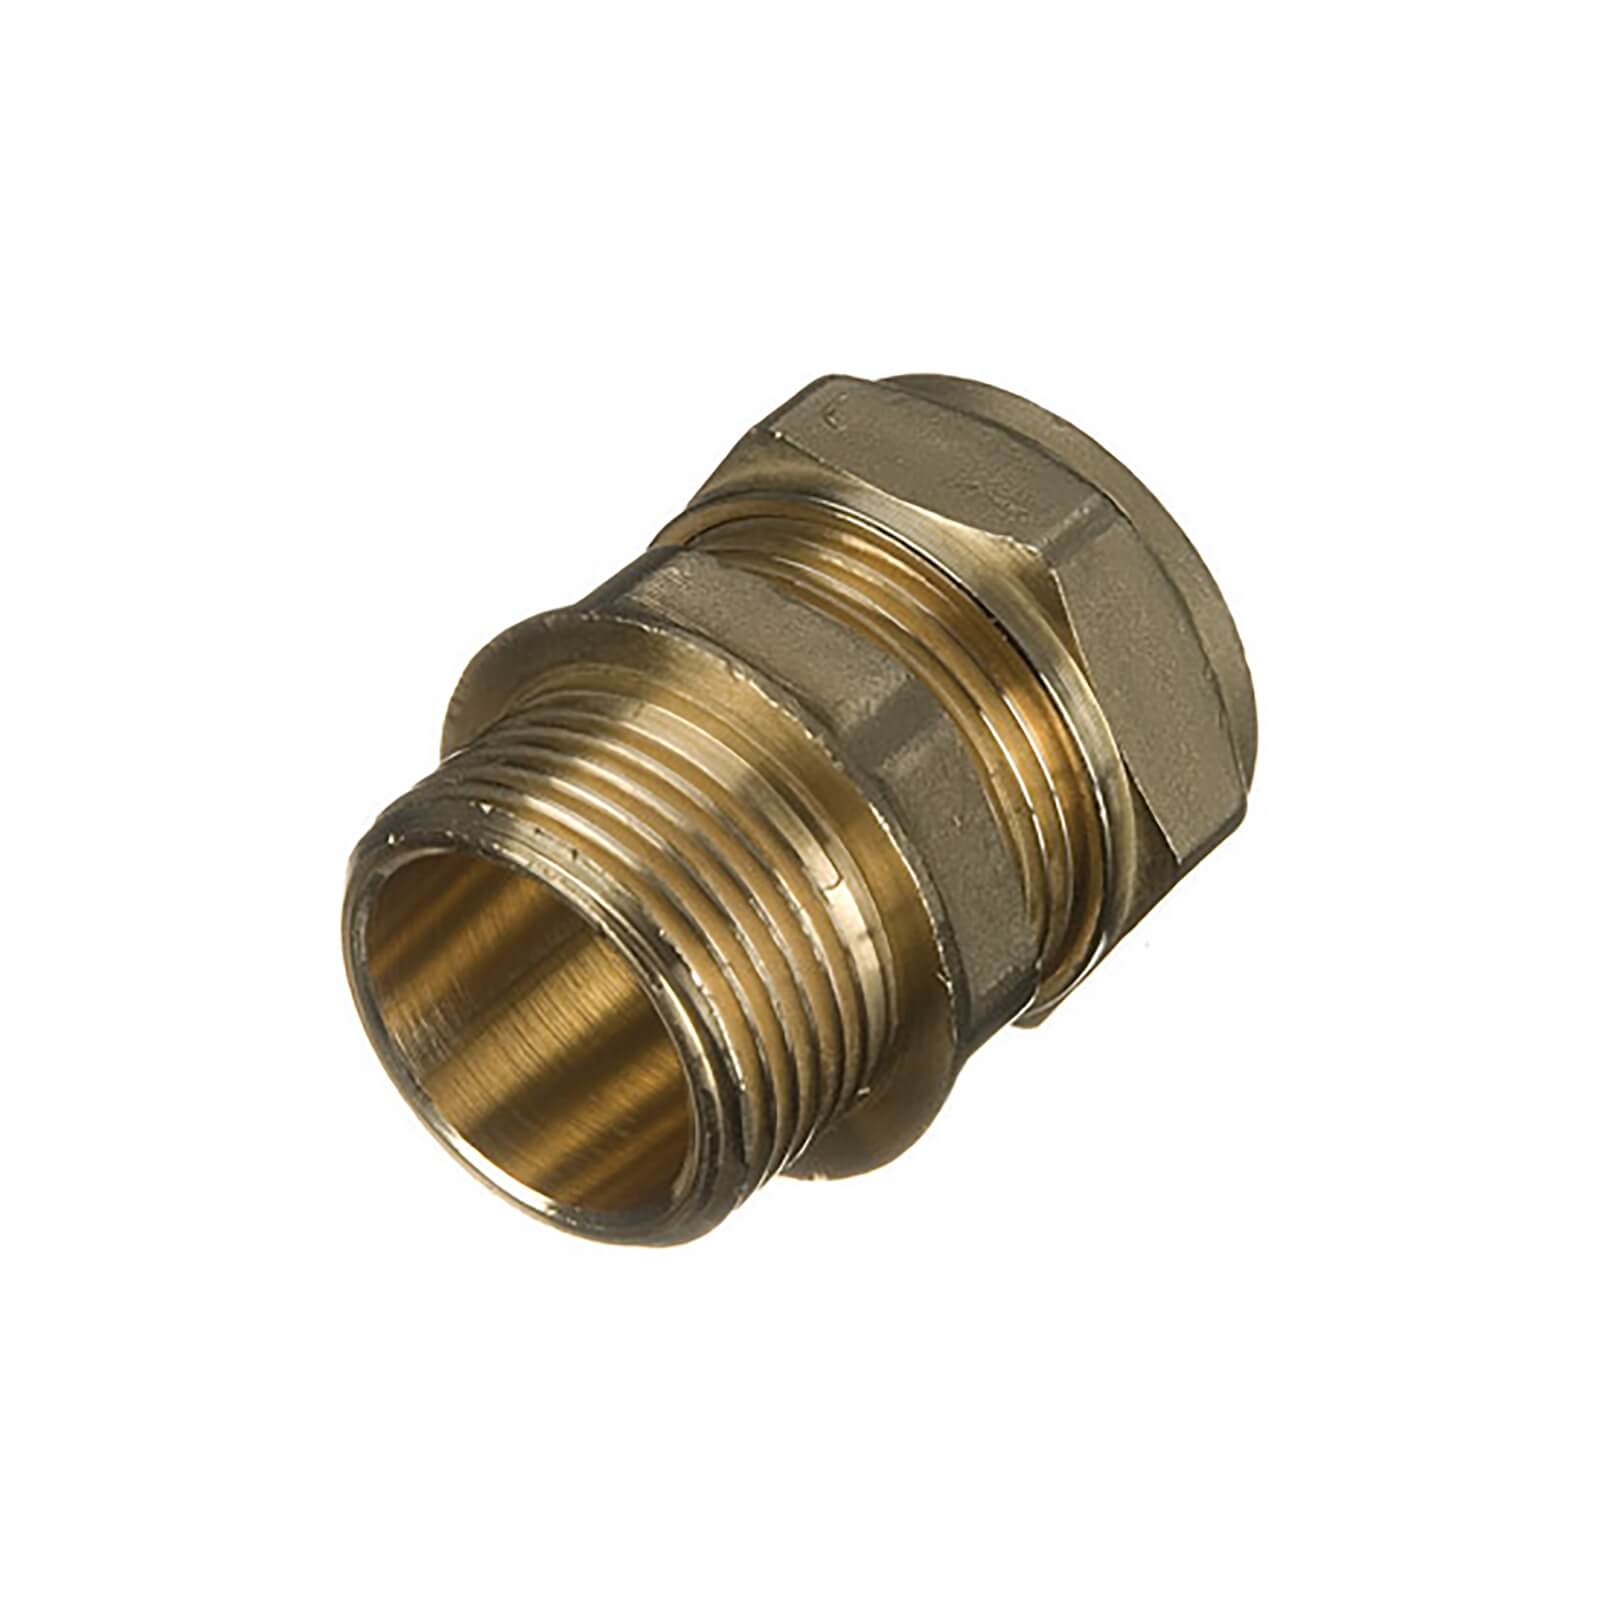 Compression Male Coupler 22mm x 0.75in